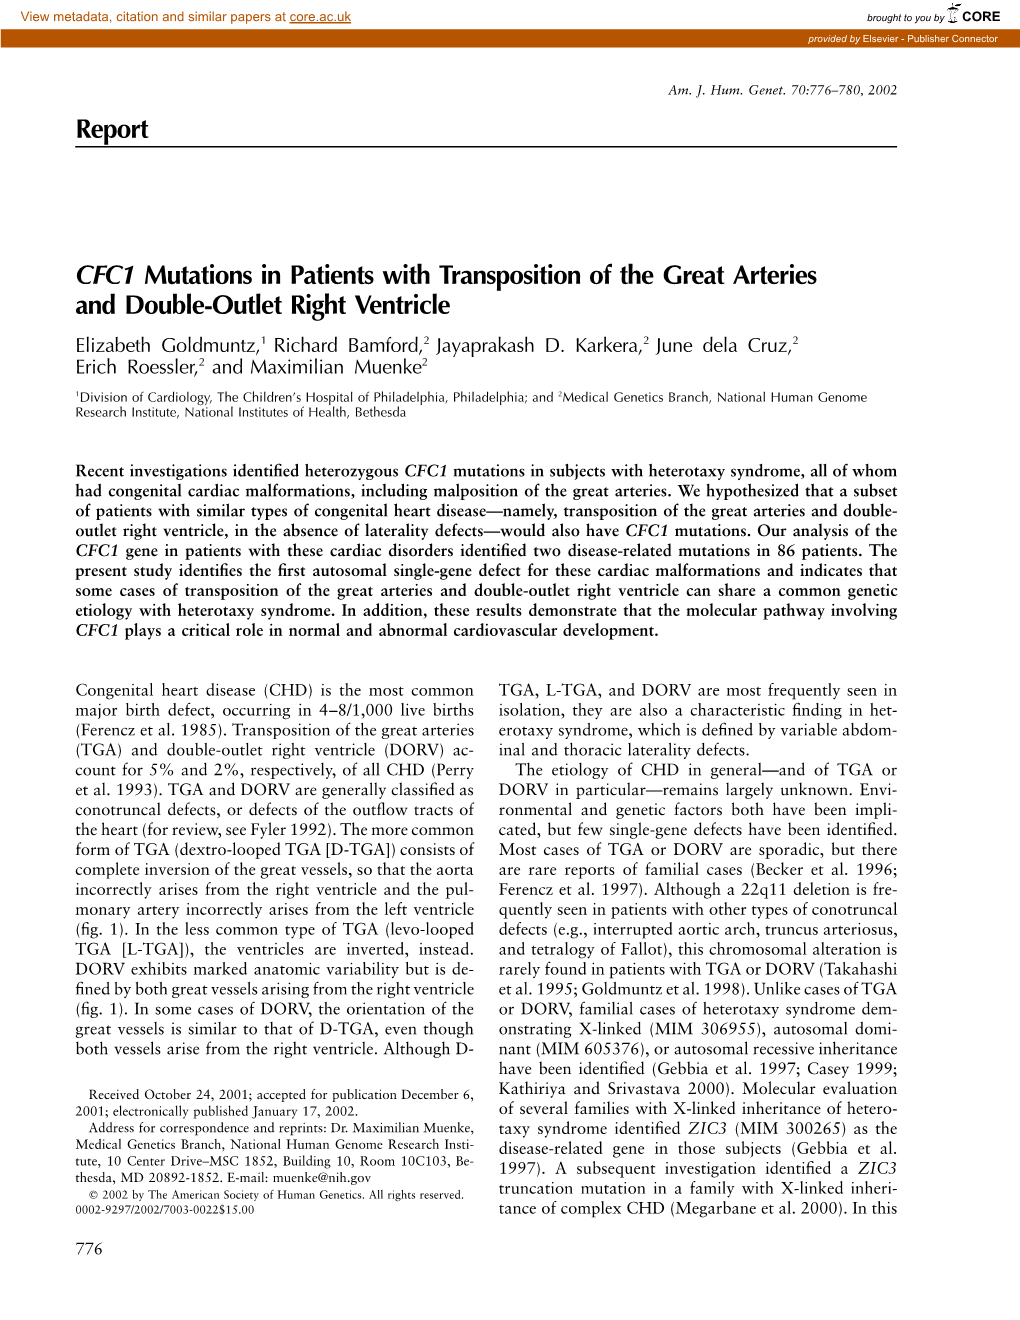 Report CFC1 Mutations in Patients with Transposition of the Great